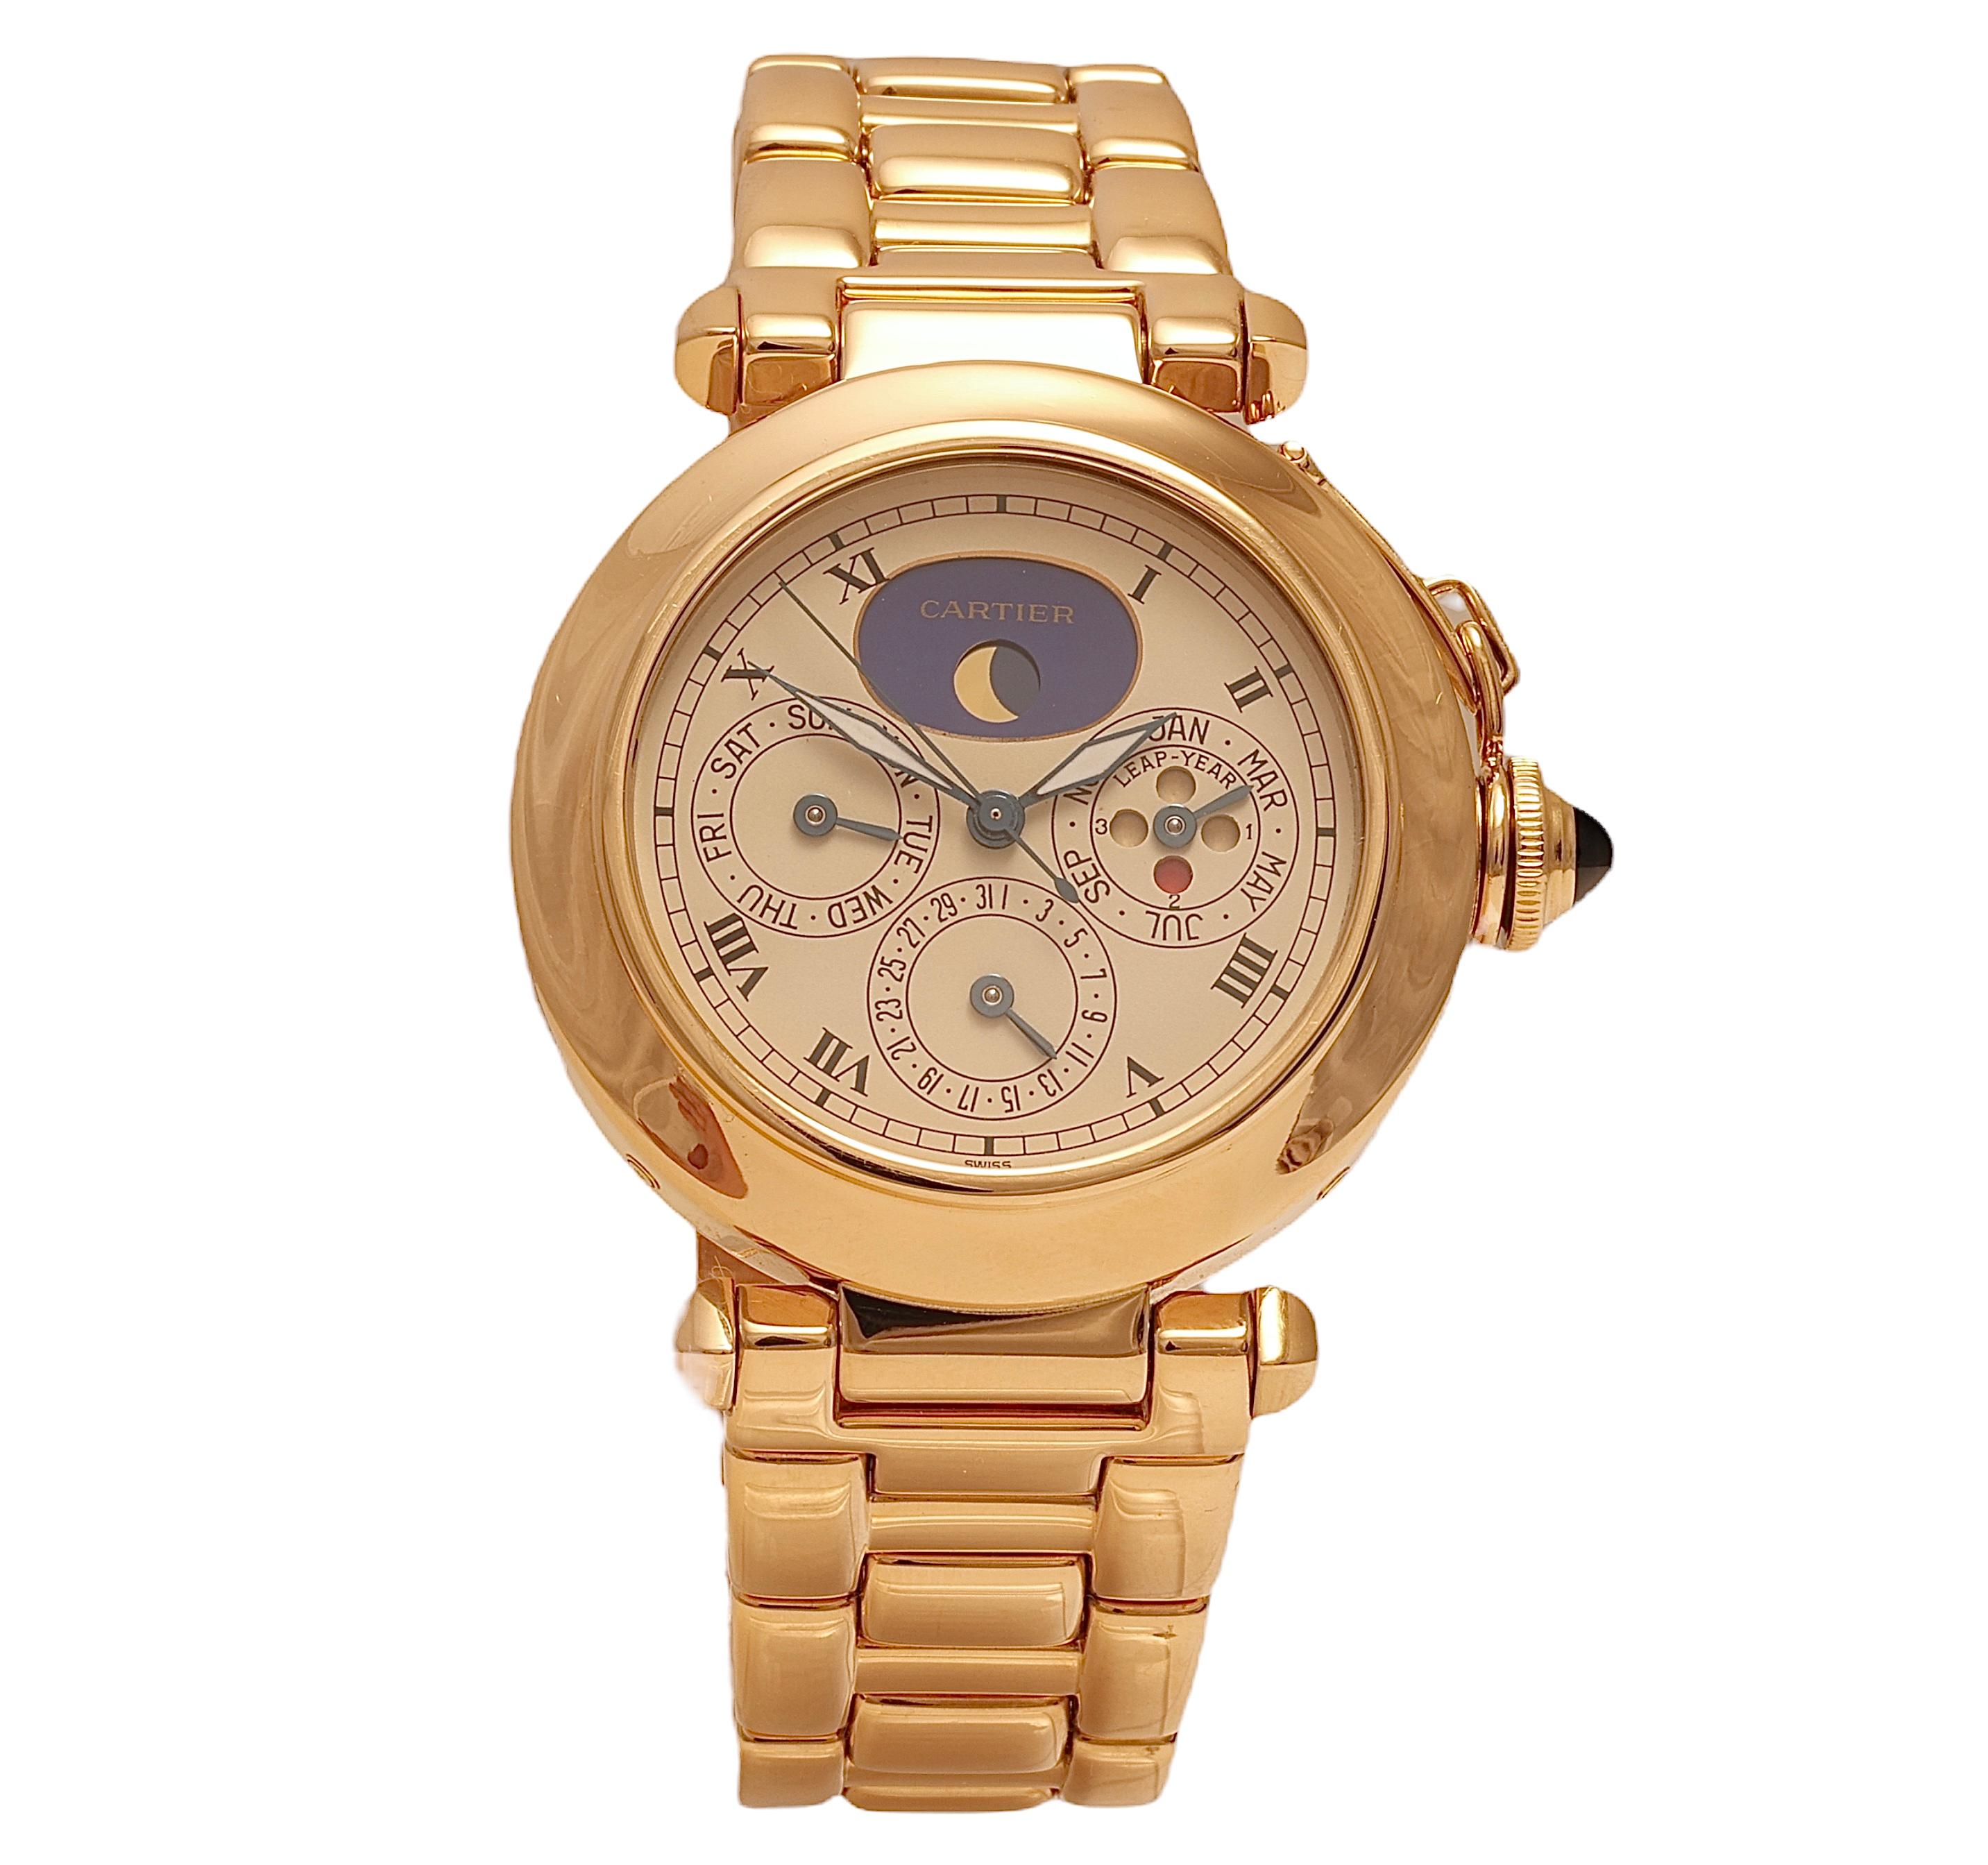 18 Kt Cartier Pasha Perpetual Calendar Wrist Watch, Day Date Month Moon Phase 4